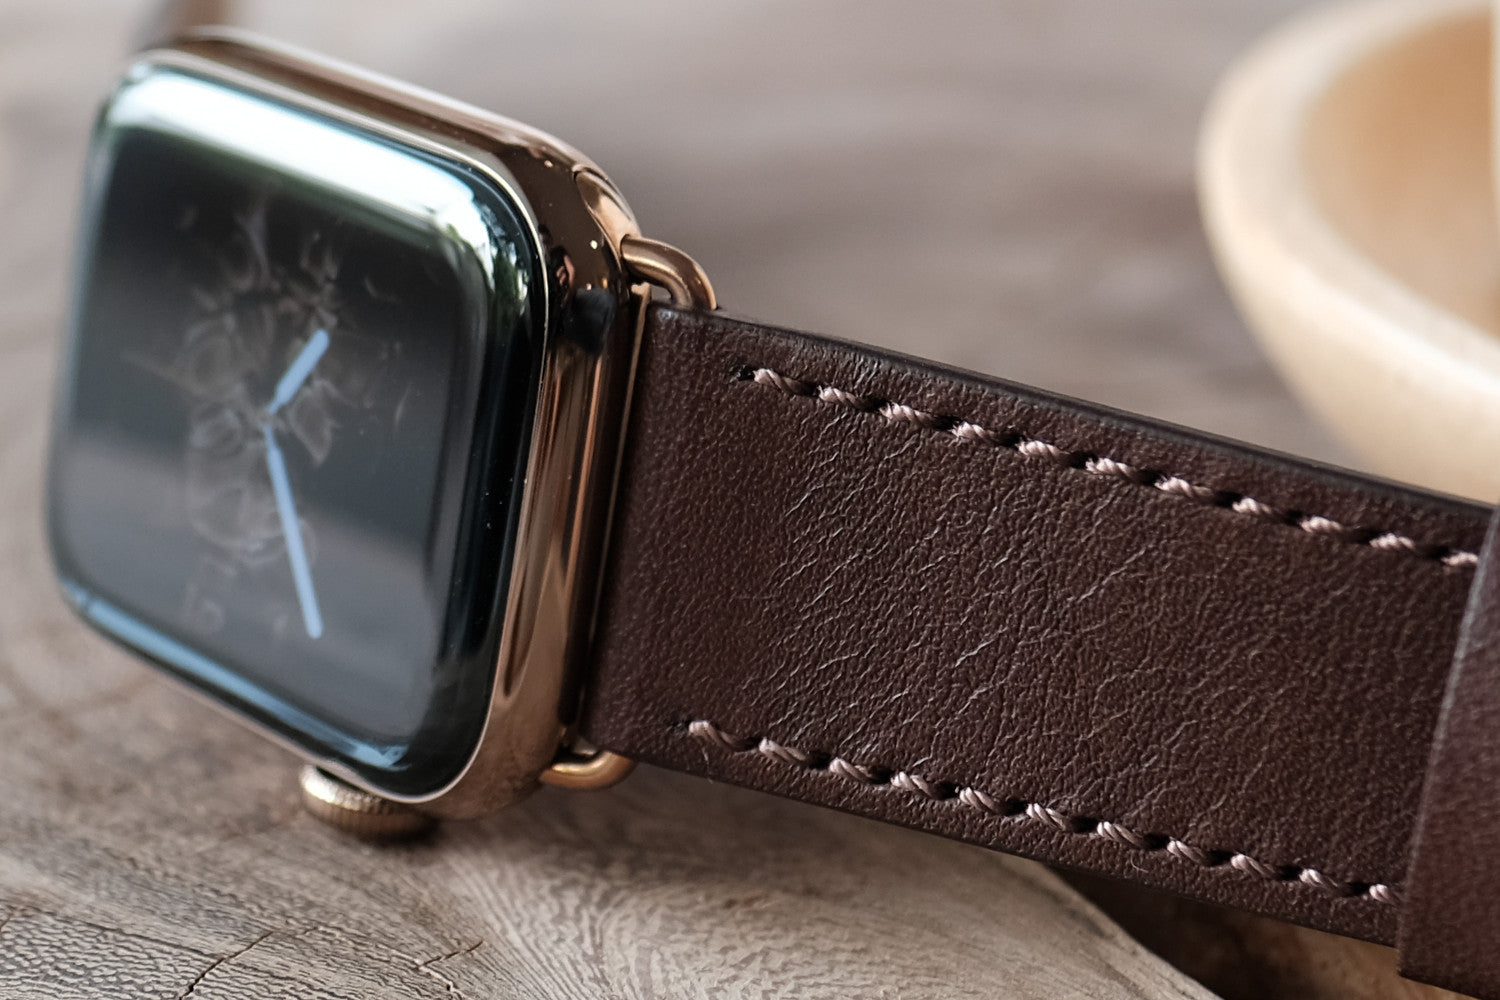 Pin and Buckle Apple Watch Straps - Full Grain Vegetable Tanned Leather - Luxe - Mocha Brown - Full Grain Vegetable Tanned Leather